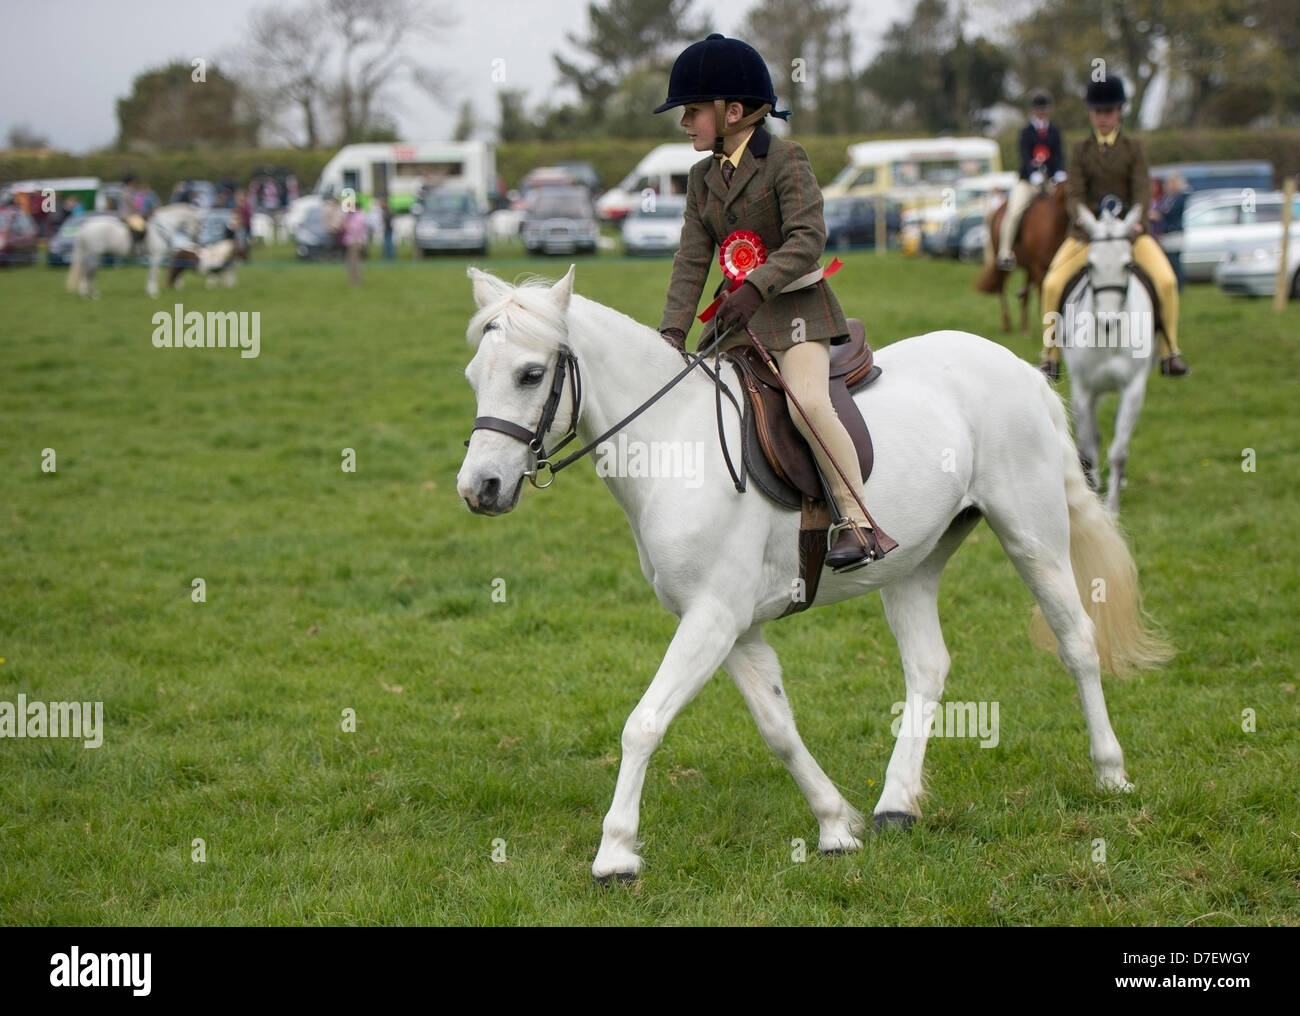 Helston, UK. 6th May, 2013. Horse and junior jockey parade in the show ring at Helston's Flora Horseshow event Credit: Bob Sharples/Alamy Live New Stock Photo